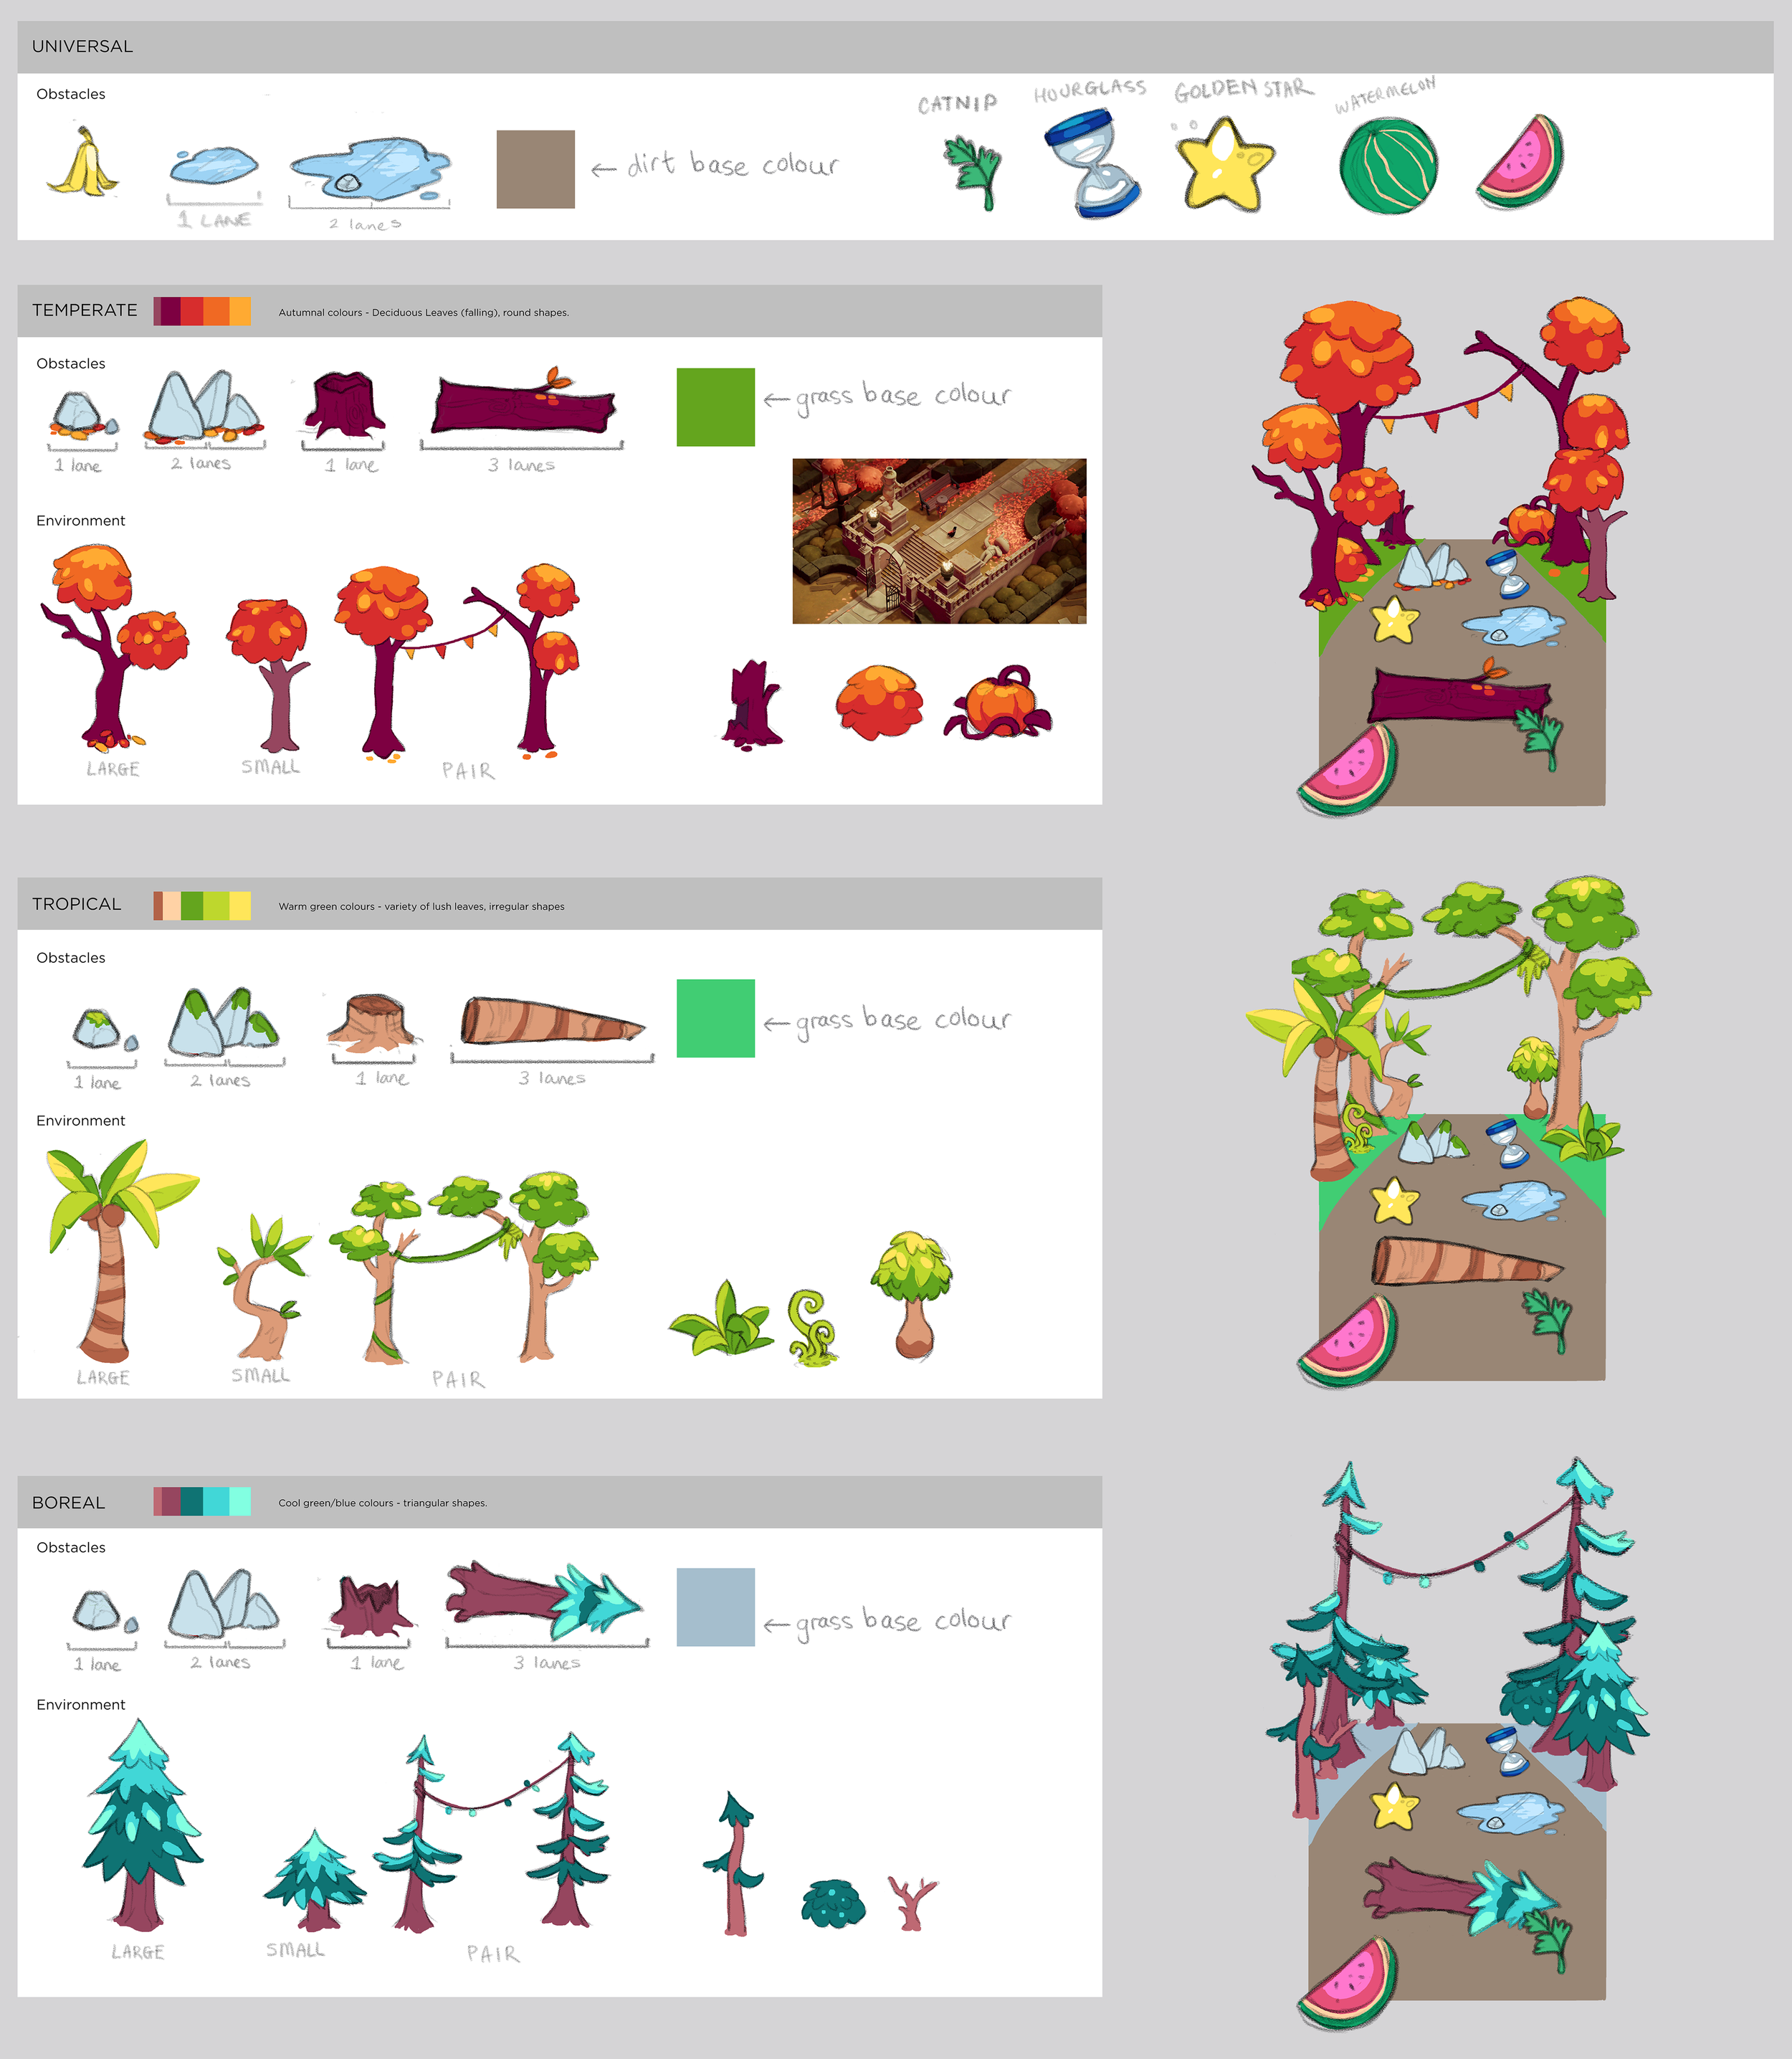 Refined_Running_Game_Asset_Concepts.png